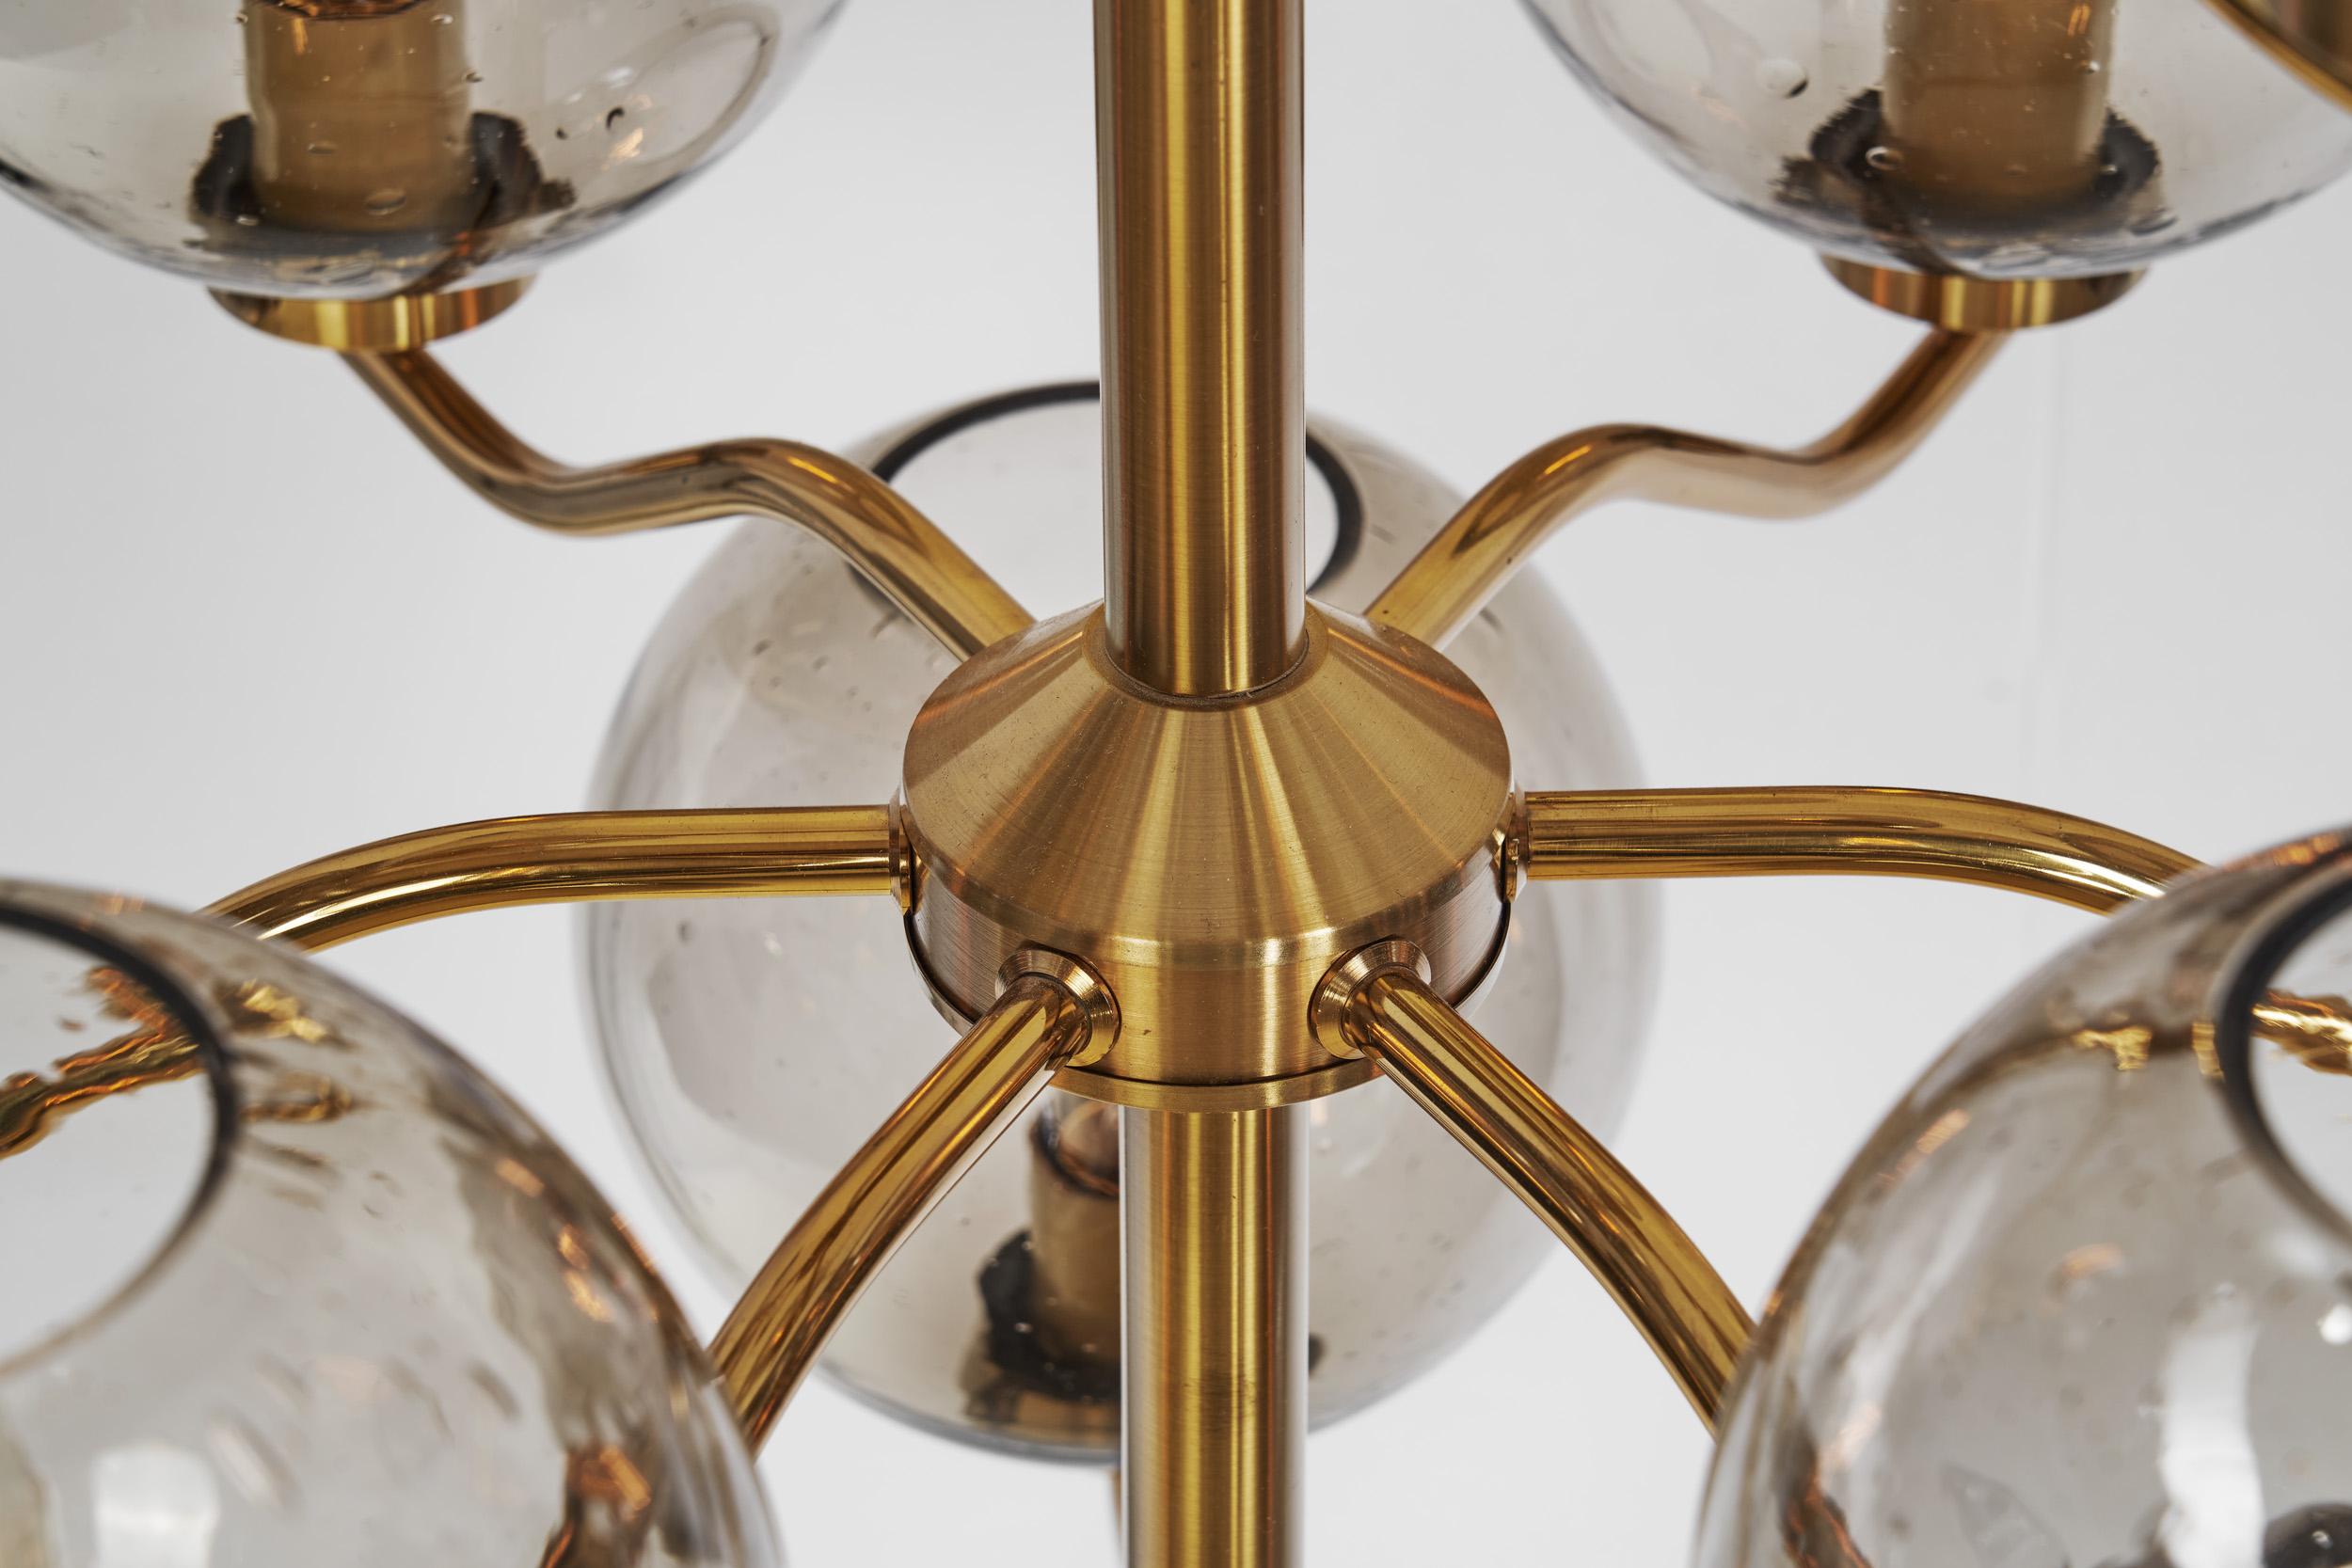 Holger Johansson Set of 6 Chandeliers with 12 Smoked Glass Shades, Sweden 1970s For Sale 4